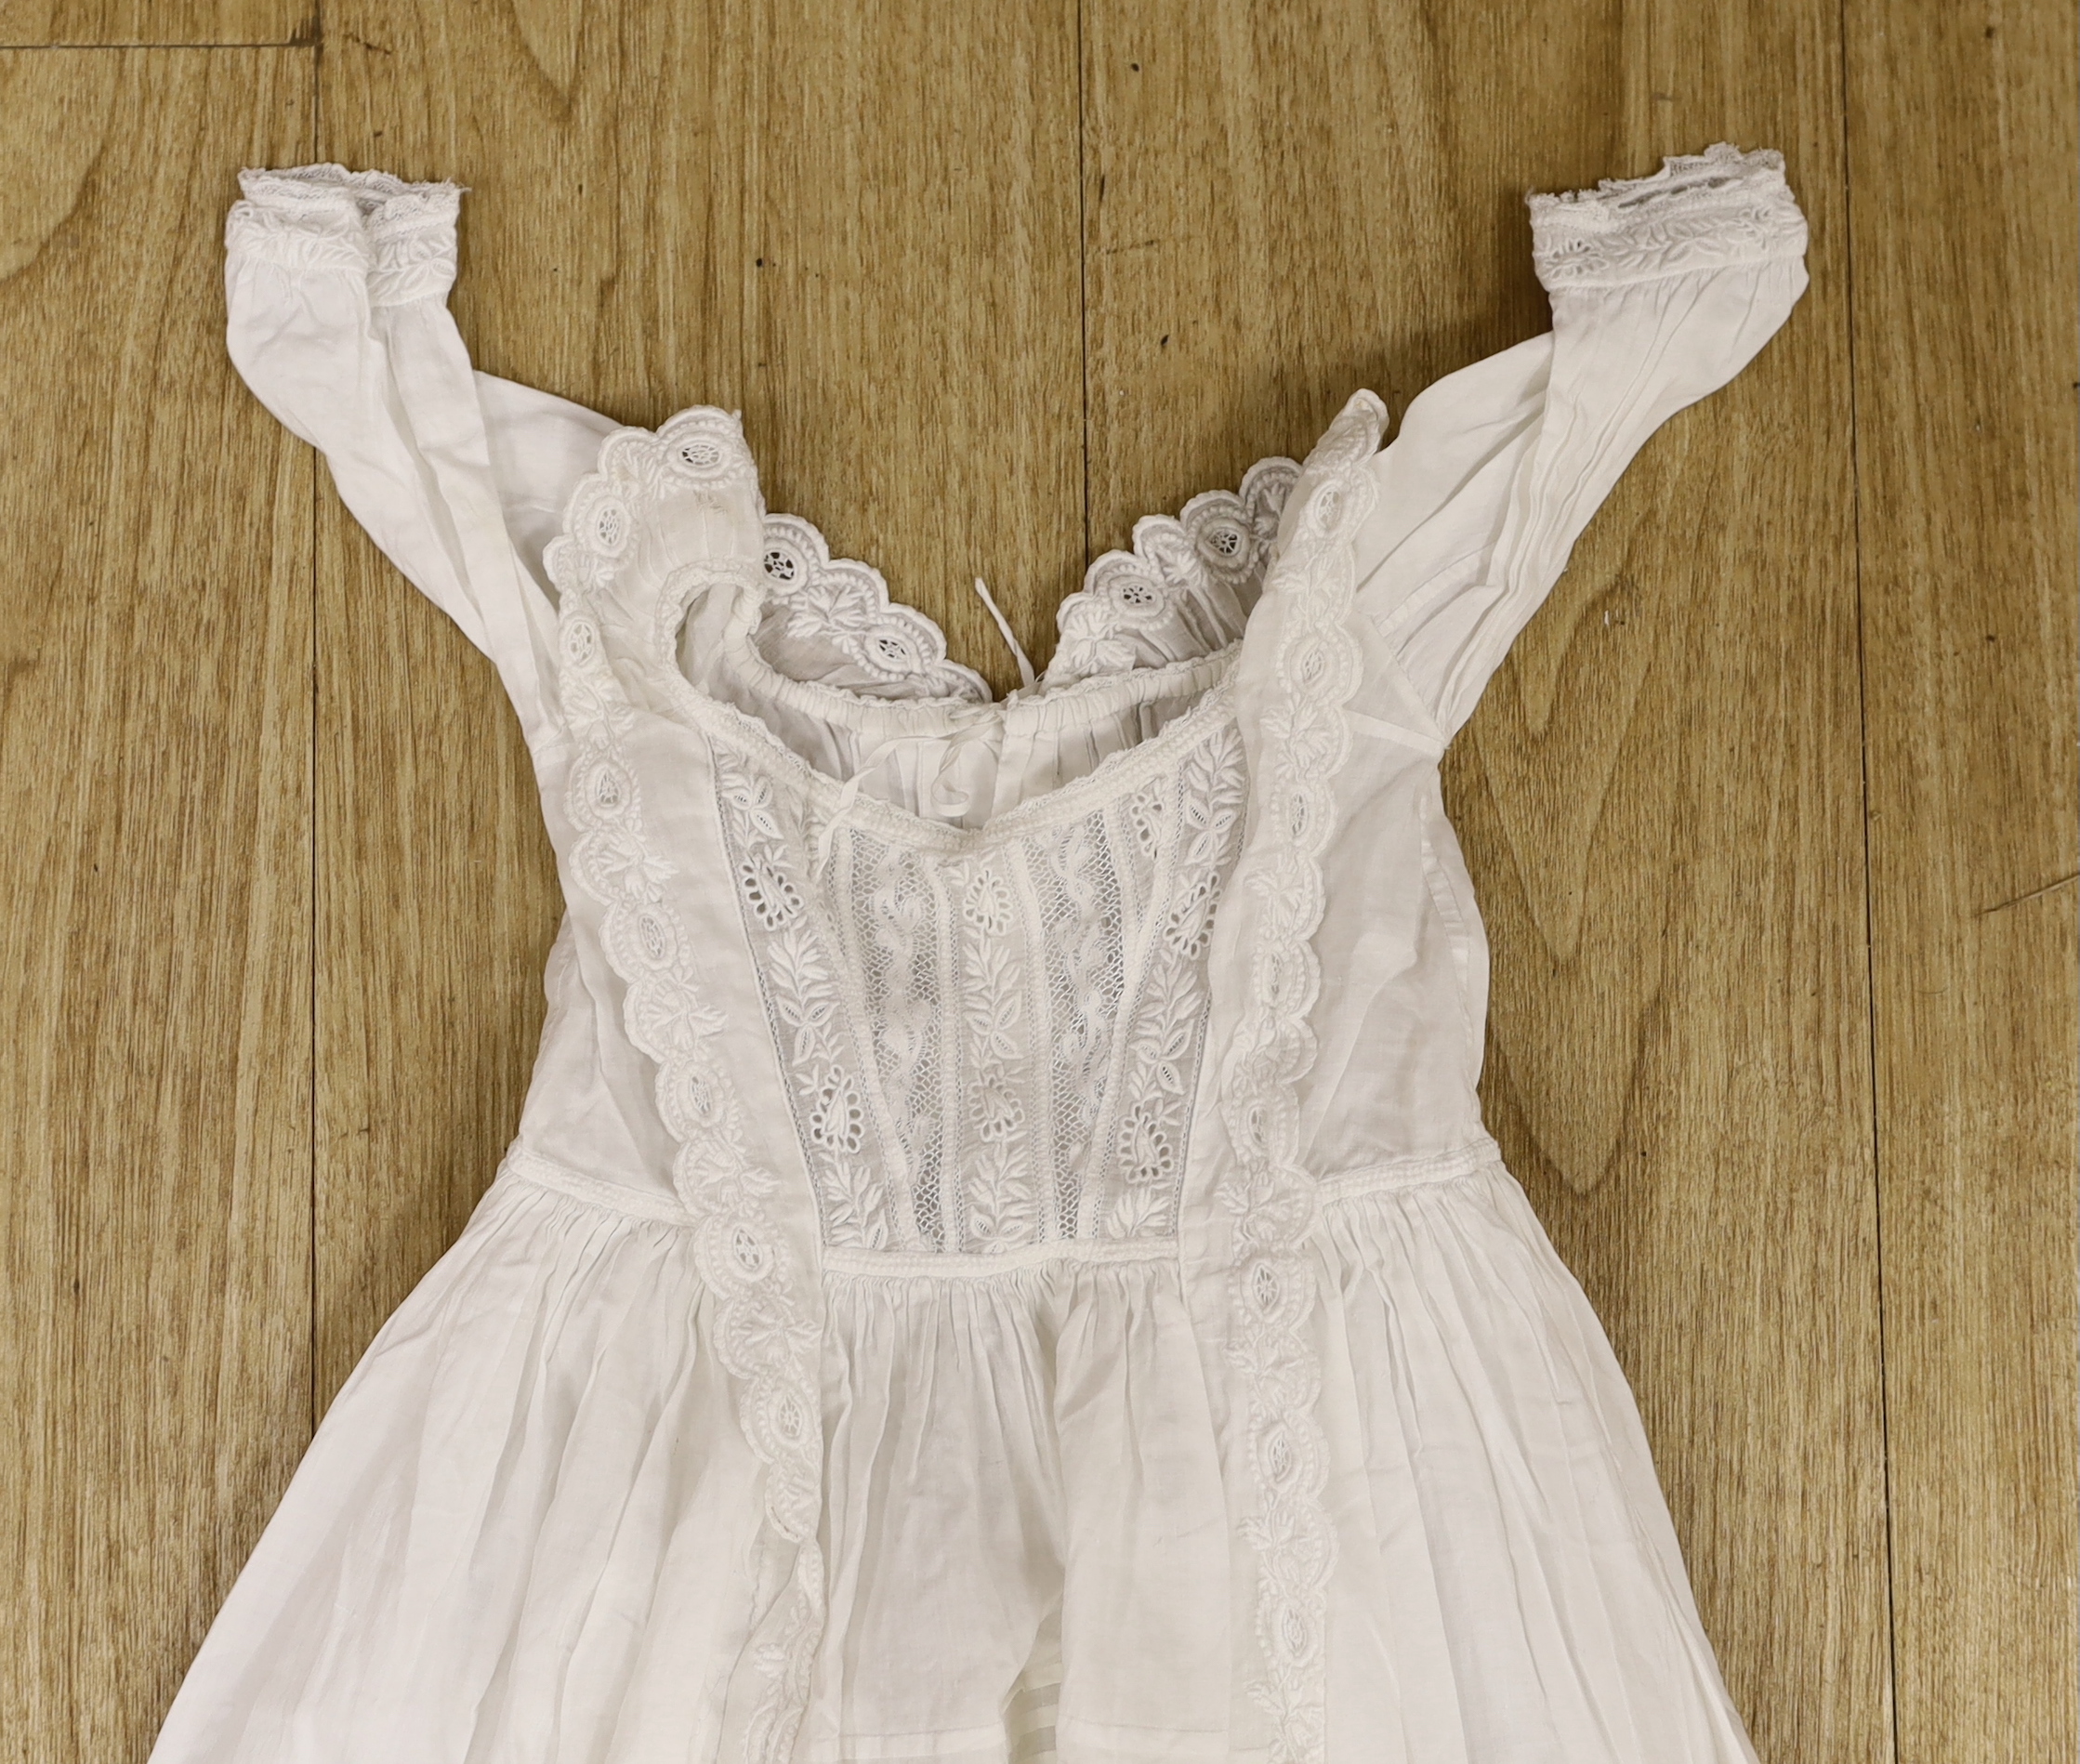 Five 19th century white worked and embroidery anglaise christening gowns, six similar baby dresses a cream wool silk embroidered shawl and a knitted shawl etc